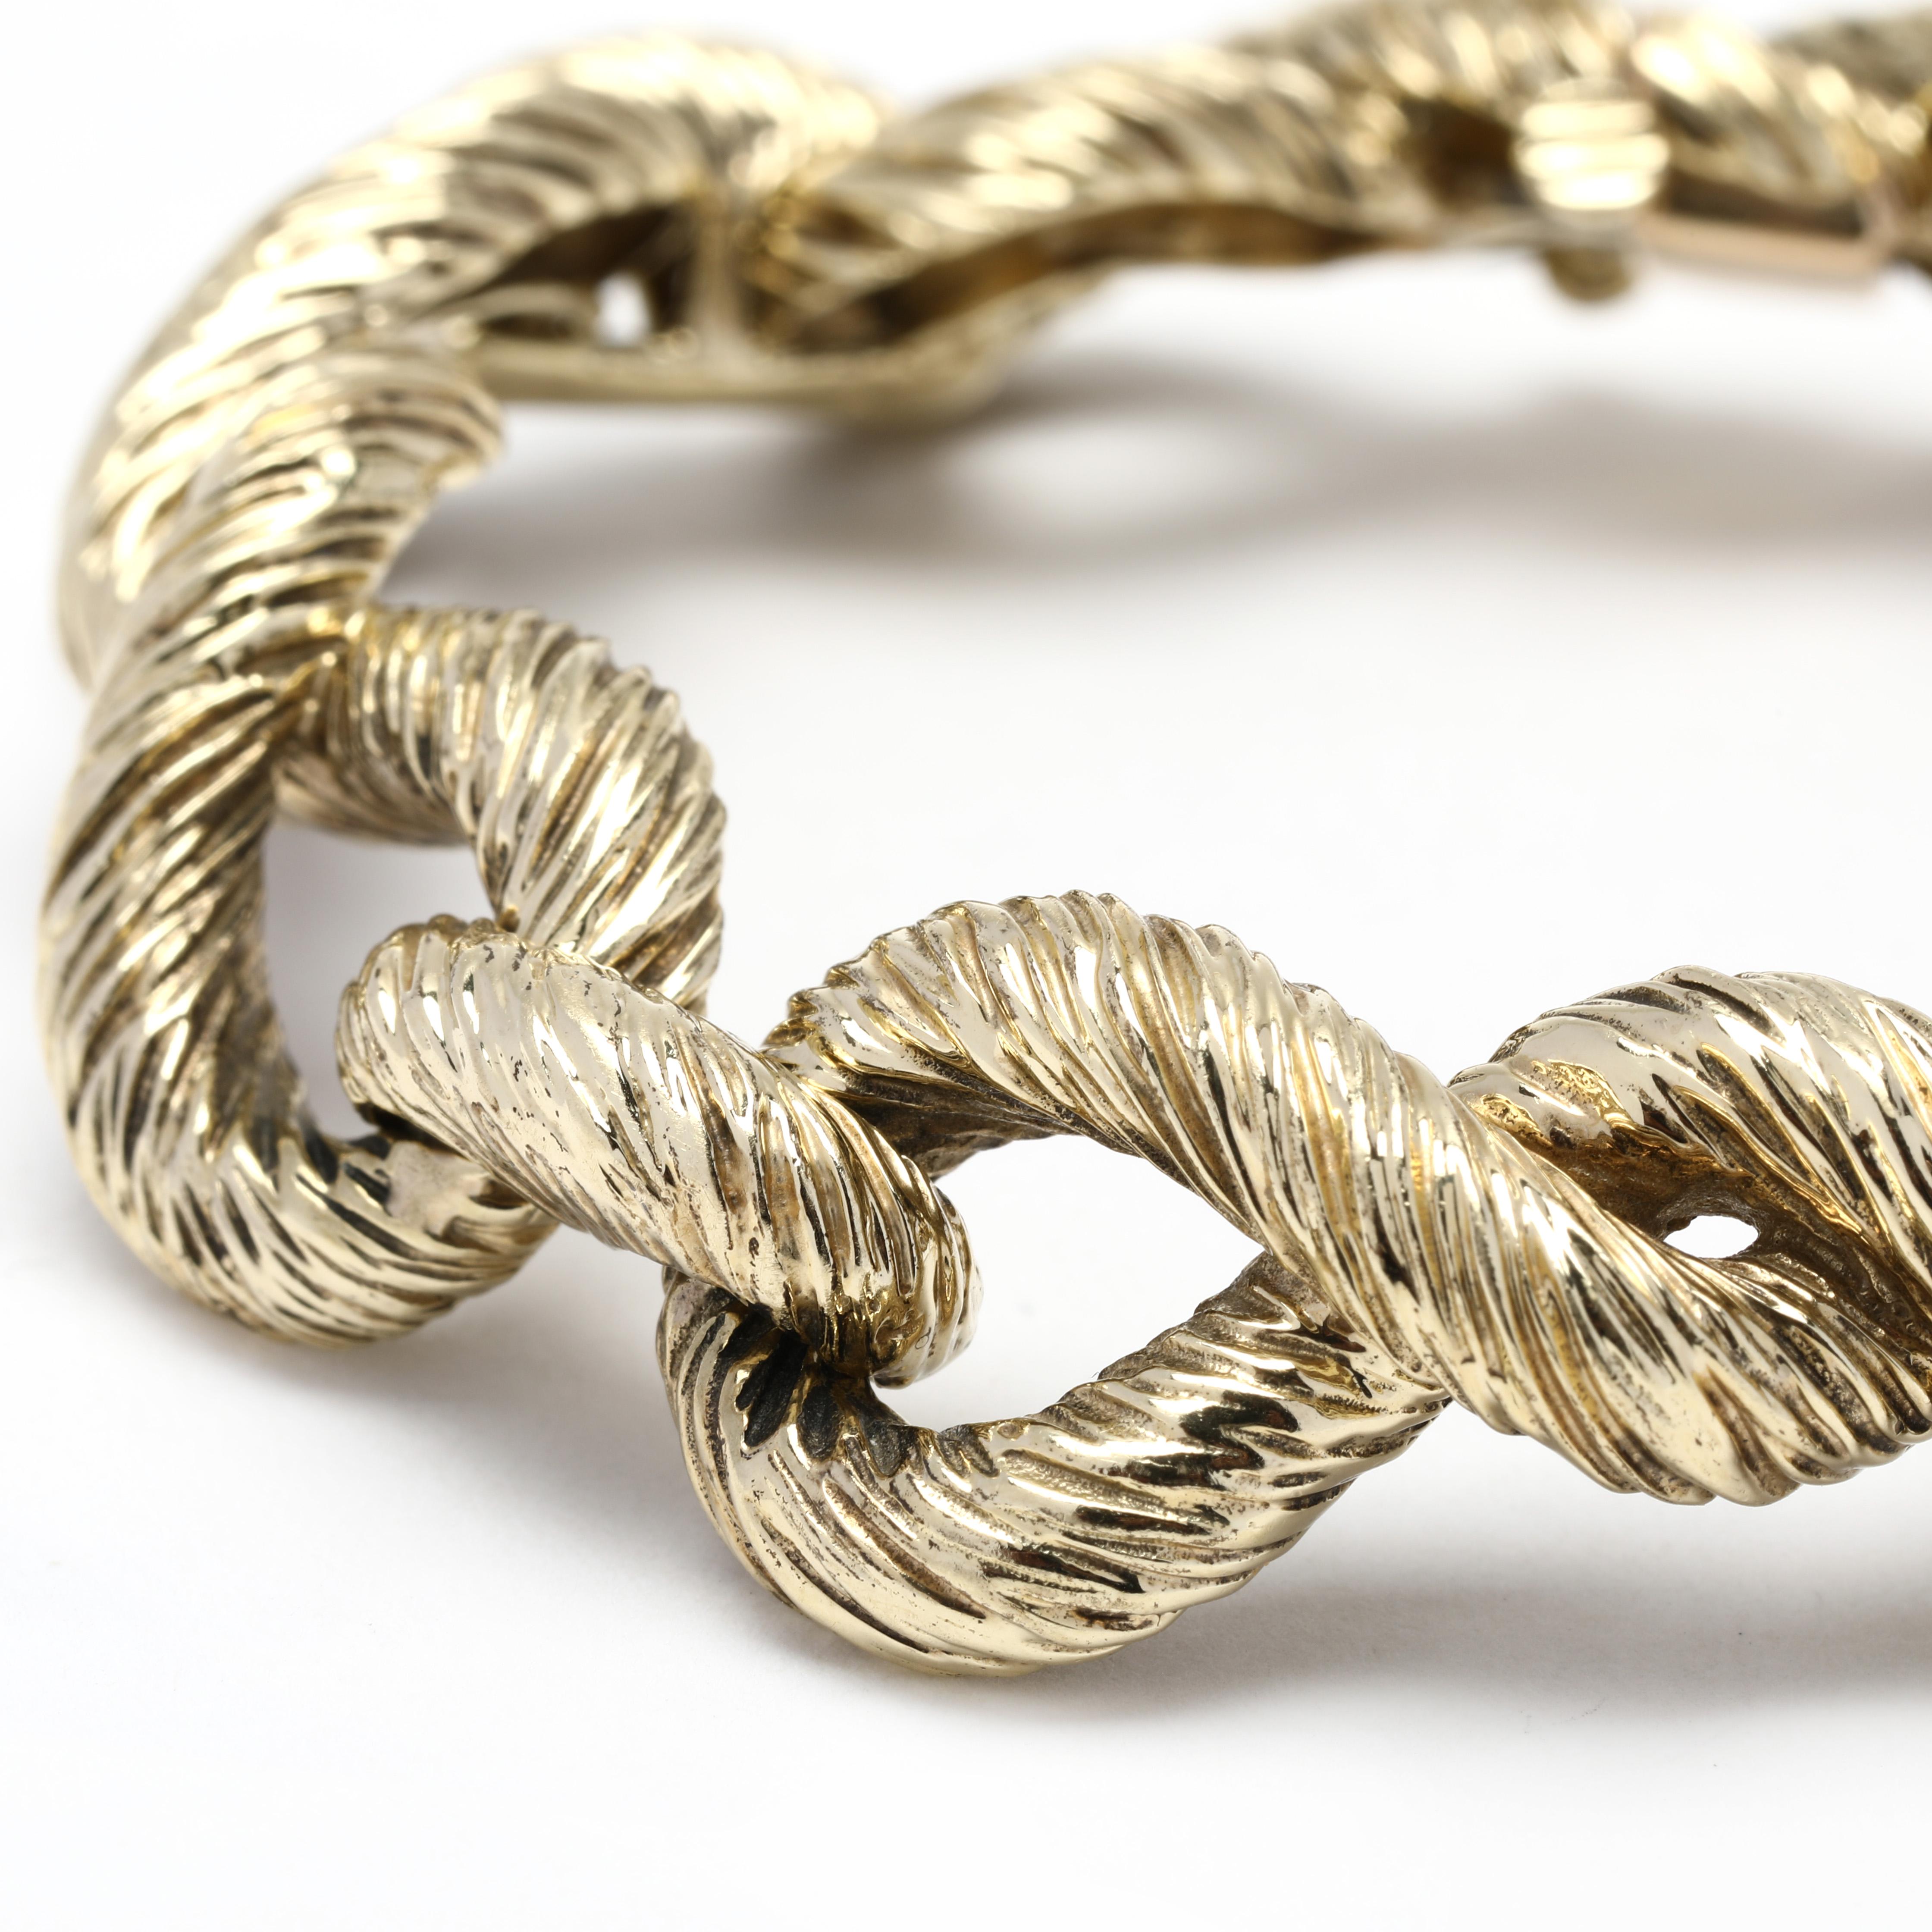 This beautiful solid 14K yellow gold figure eight link bracelet is perfect for any occasion or outfit. Accented with a textured surface that catches the light and glimmers with every move, this 7.5 inch bracelet is designed to add a modern touch to